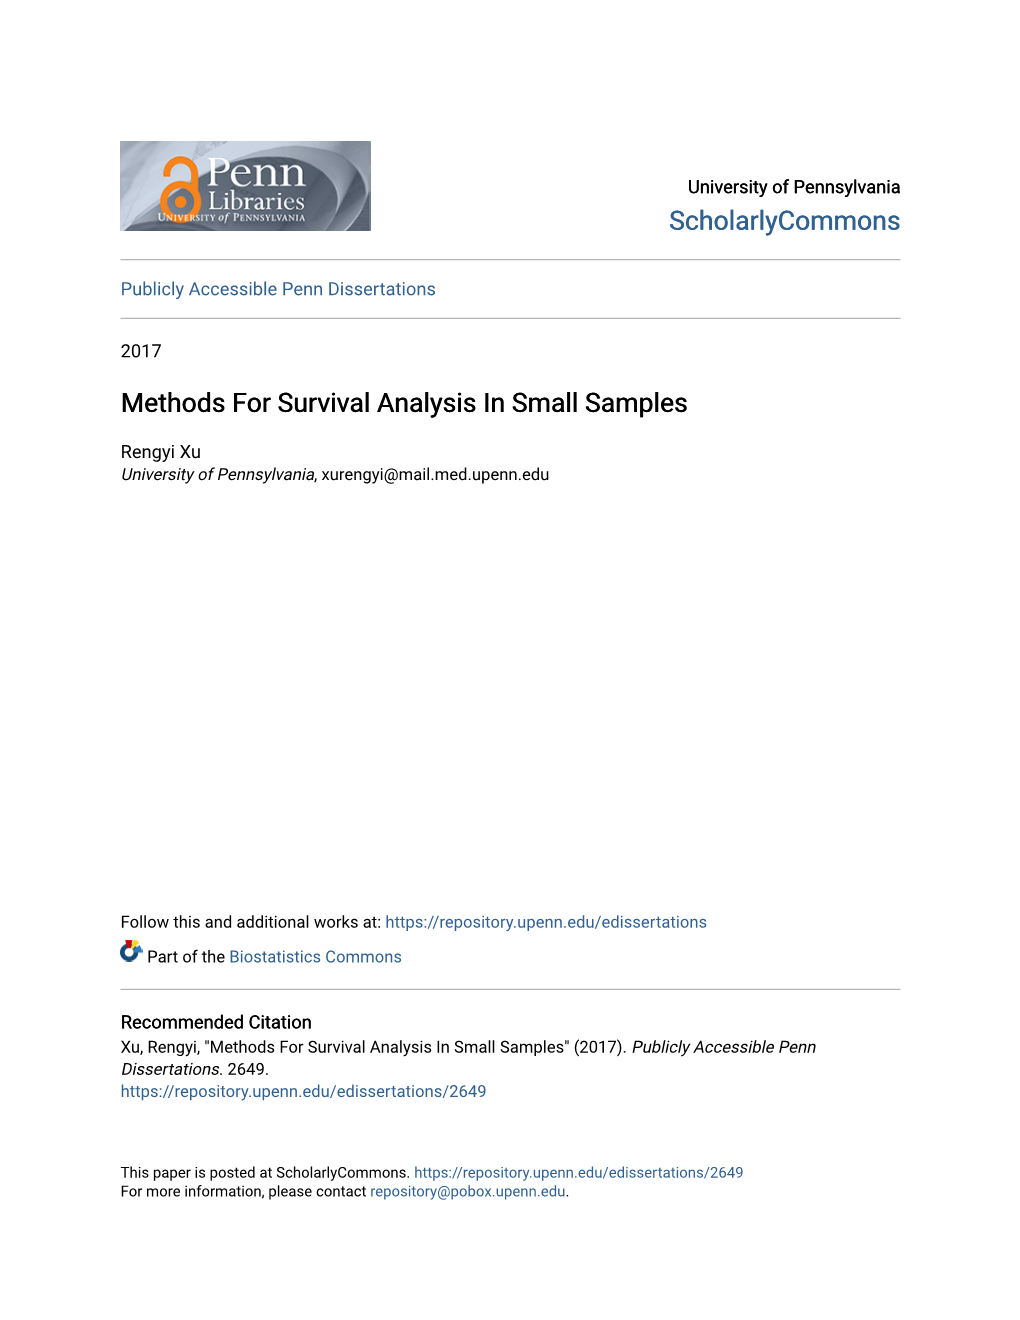 Methods for Survival Analysis in Small Samples